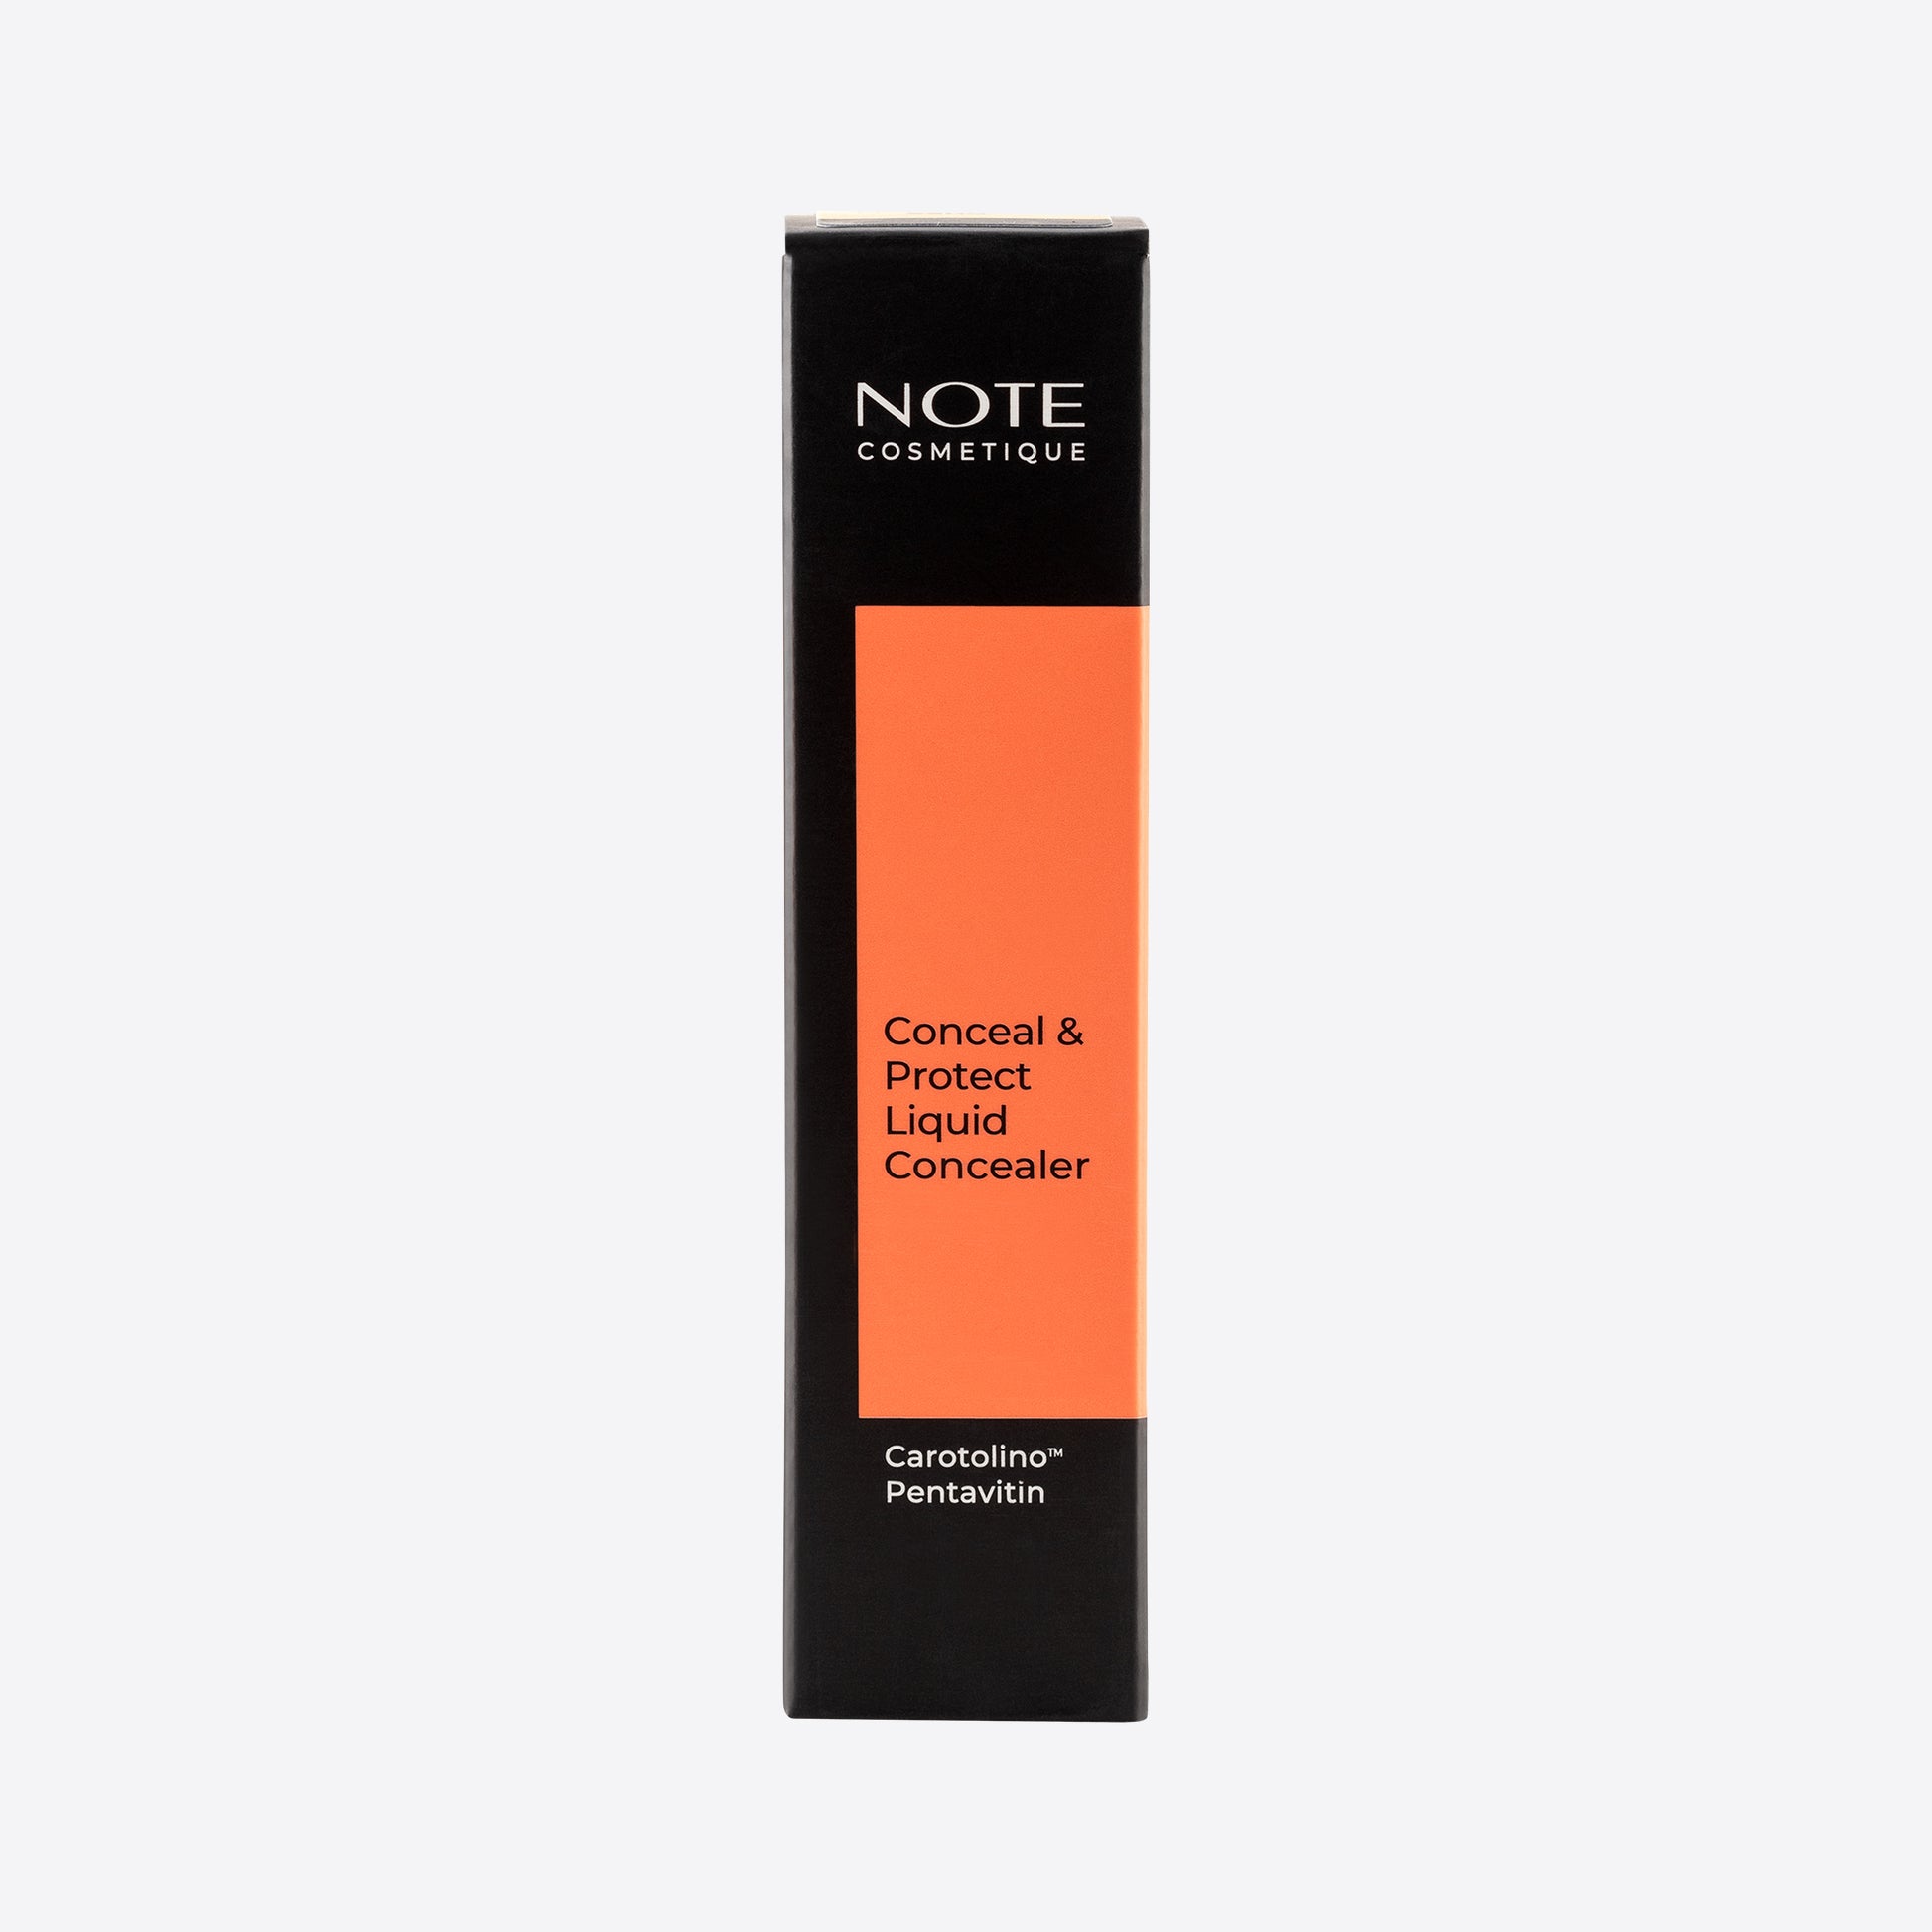 Note Conceal & Protect Liquid Concealer- 02 Sand, 4.5ml